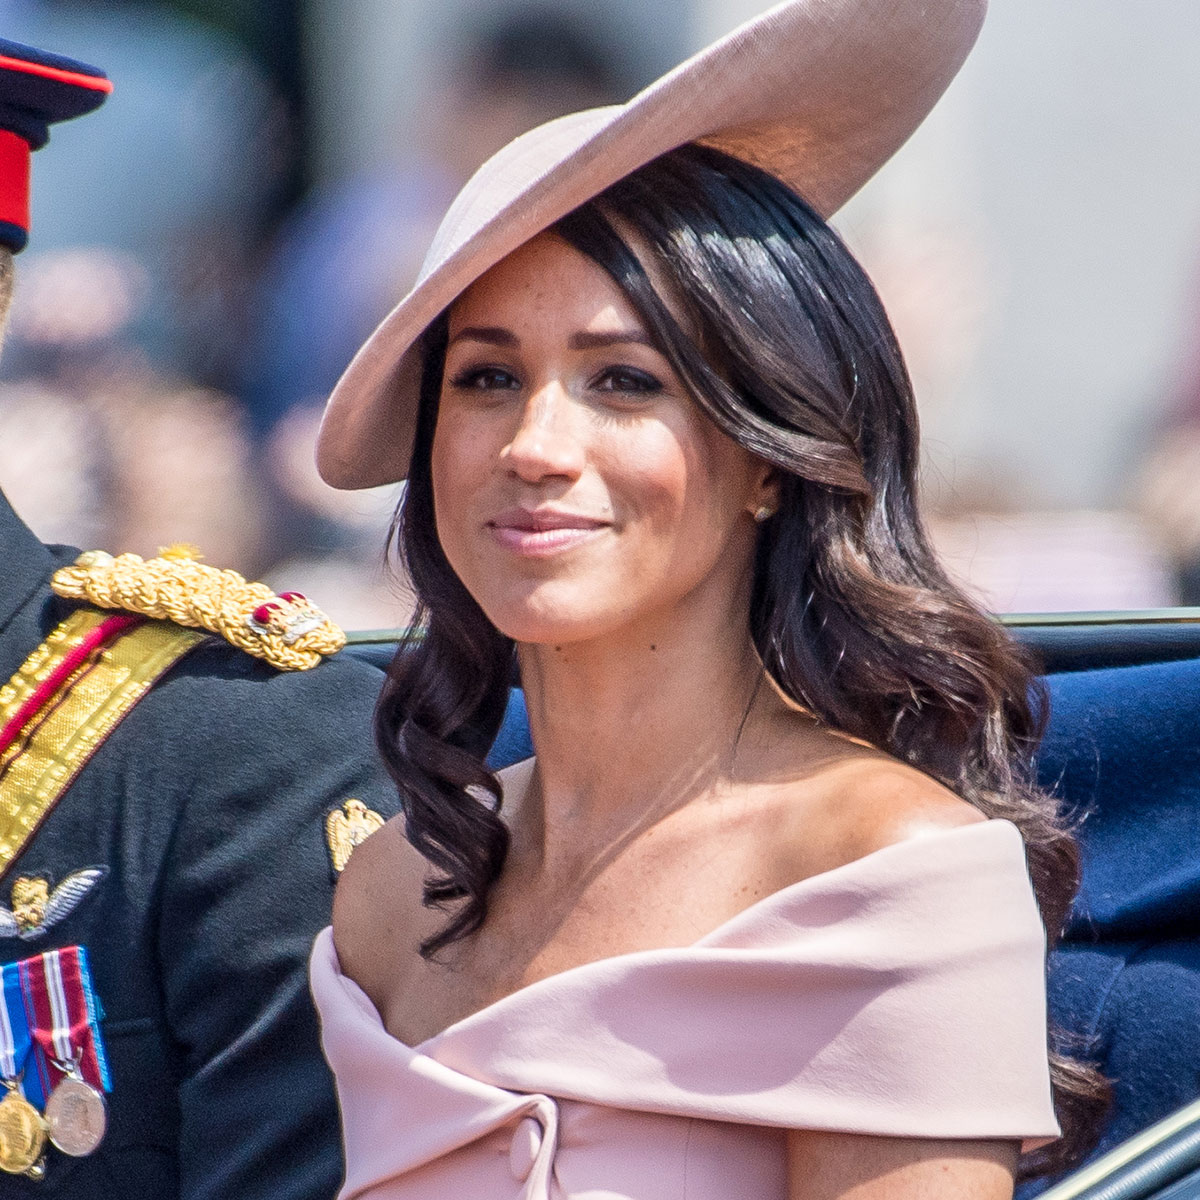 Meghan Markle has reportedly had a ‘dramatic change of heart’ and now wants to keep her royal titles